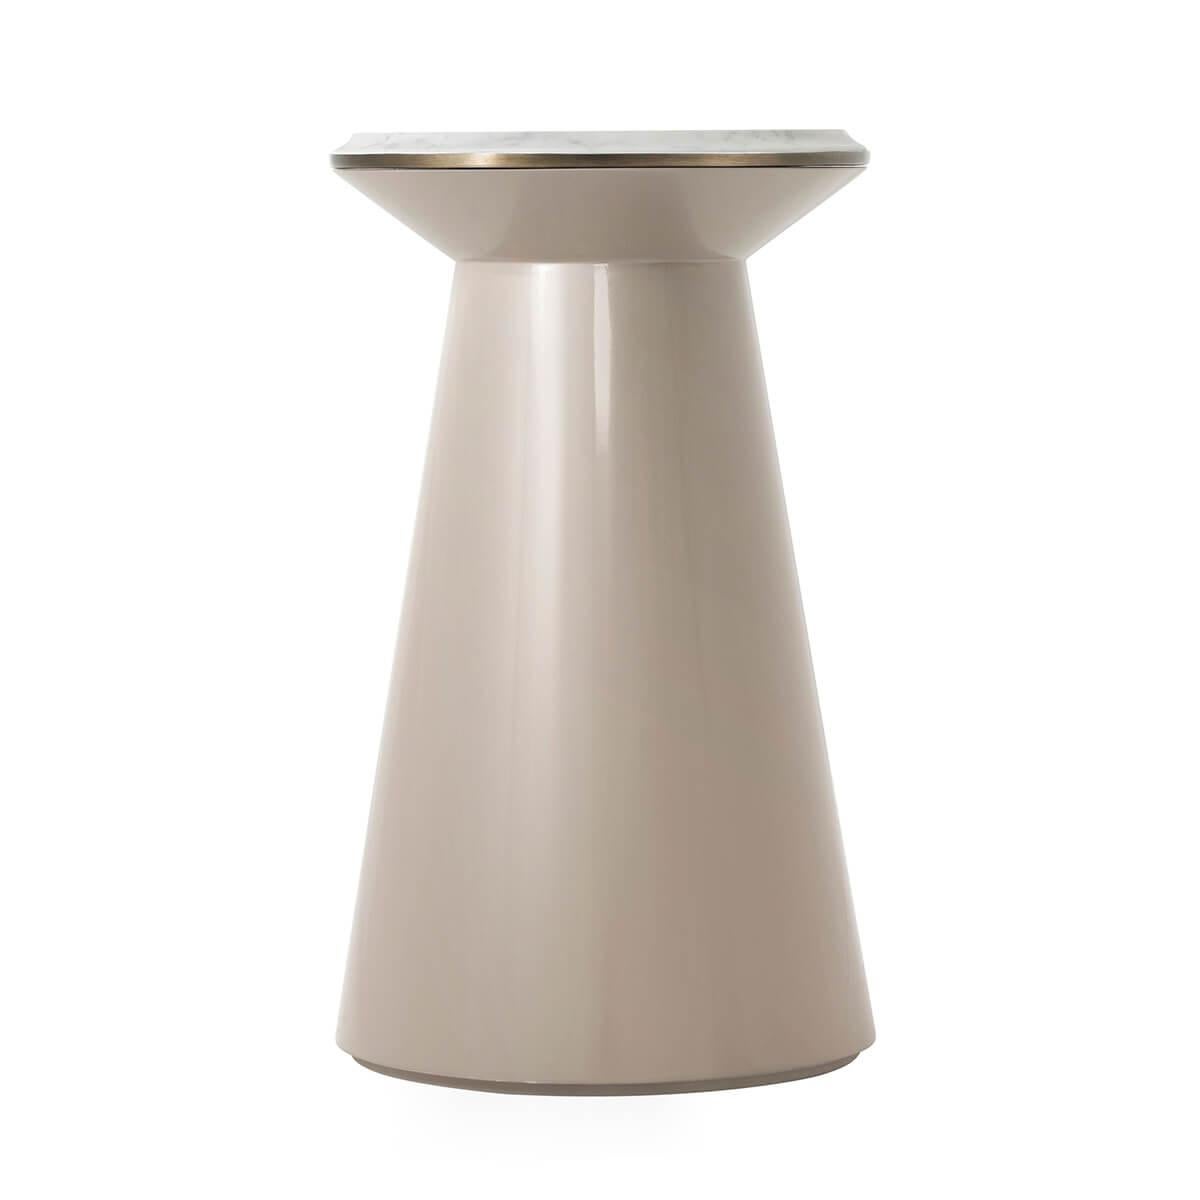 With a marble top, and a heritage bronze finish molded edge. The tapered cylinder base in a vintage taupe lacquer finish.

Dimensions: 13.75